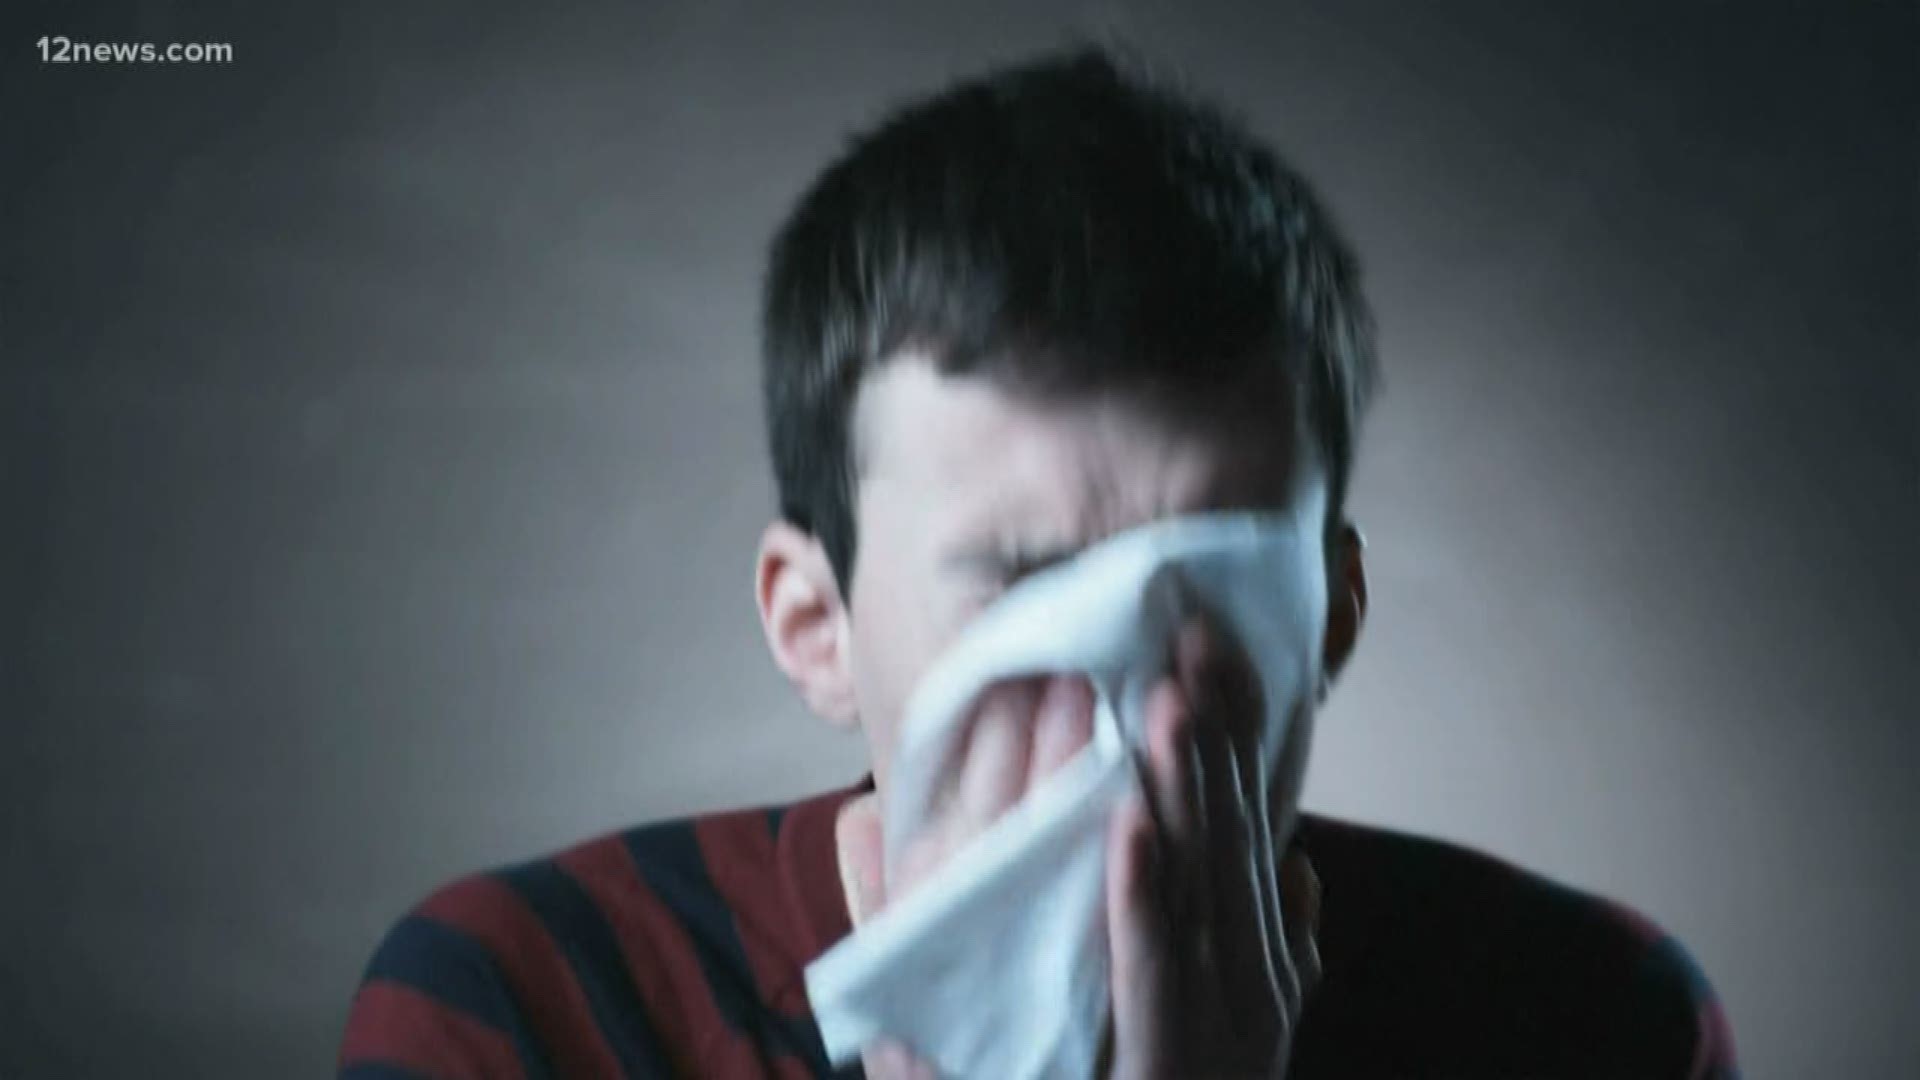 This year's flu season is nothing to sneeze at according to Arizona health officials.